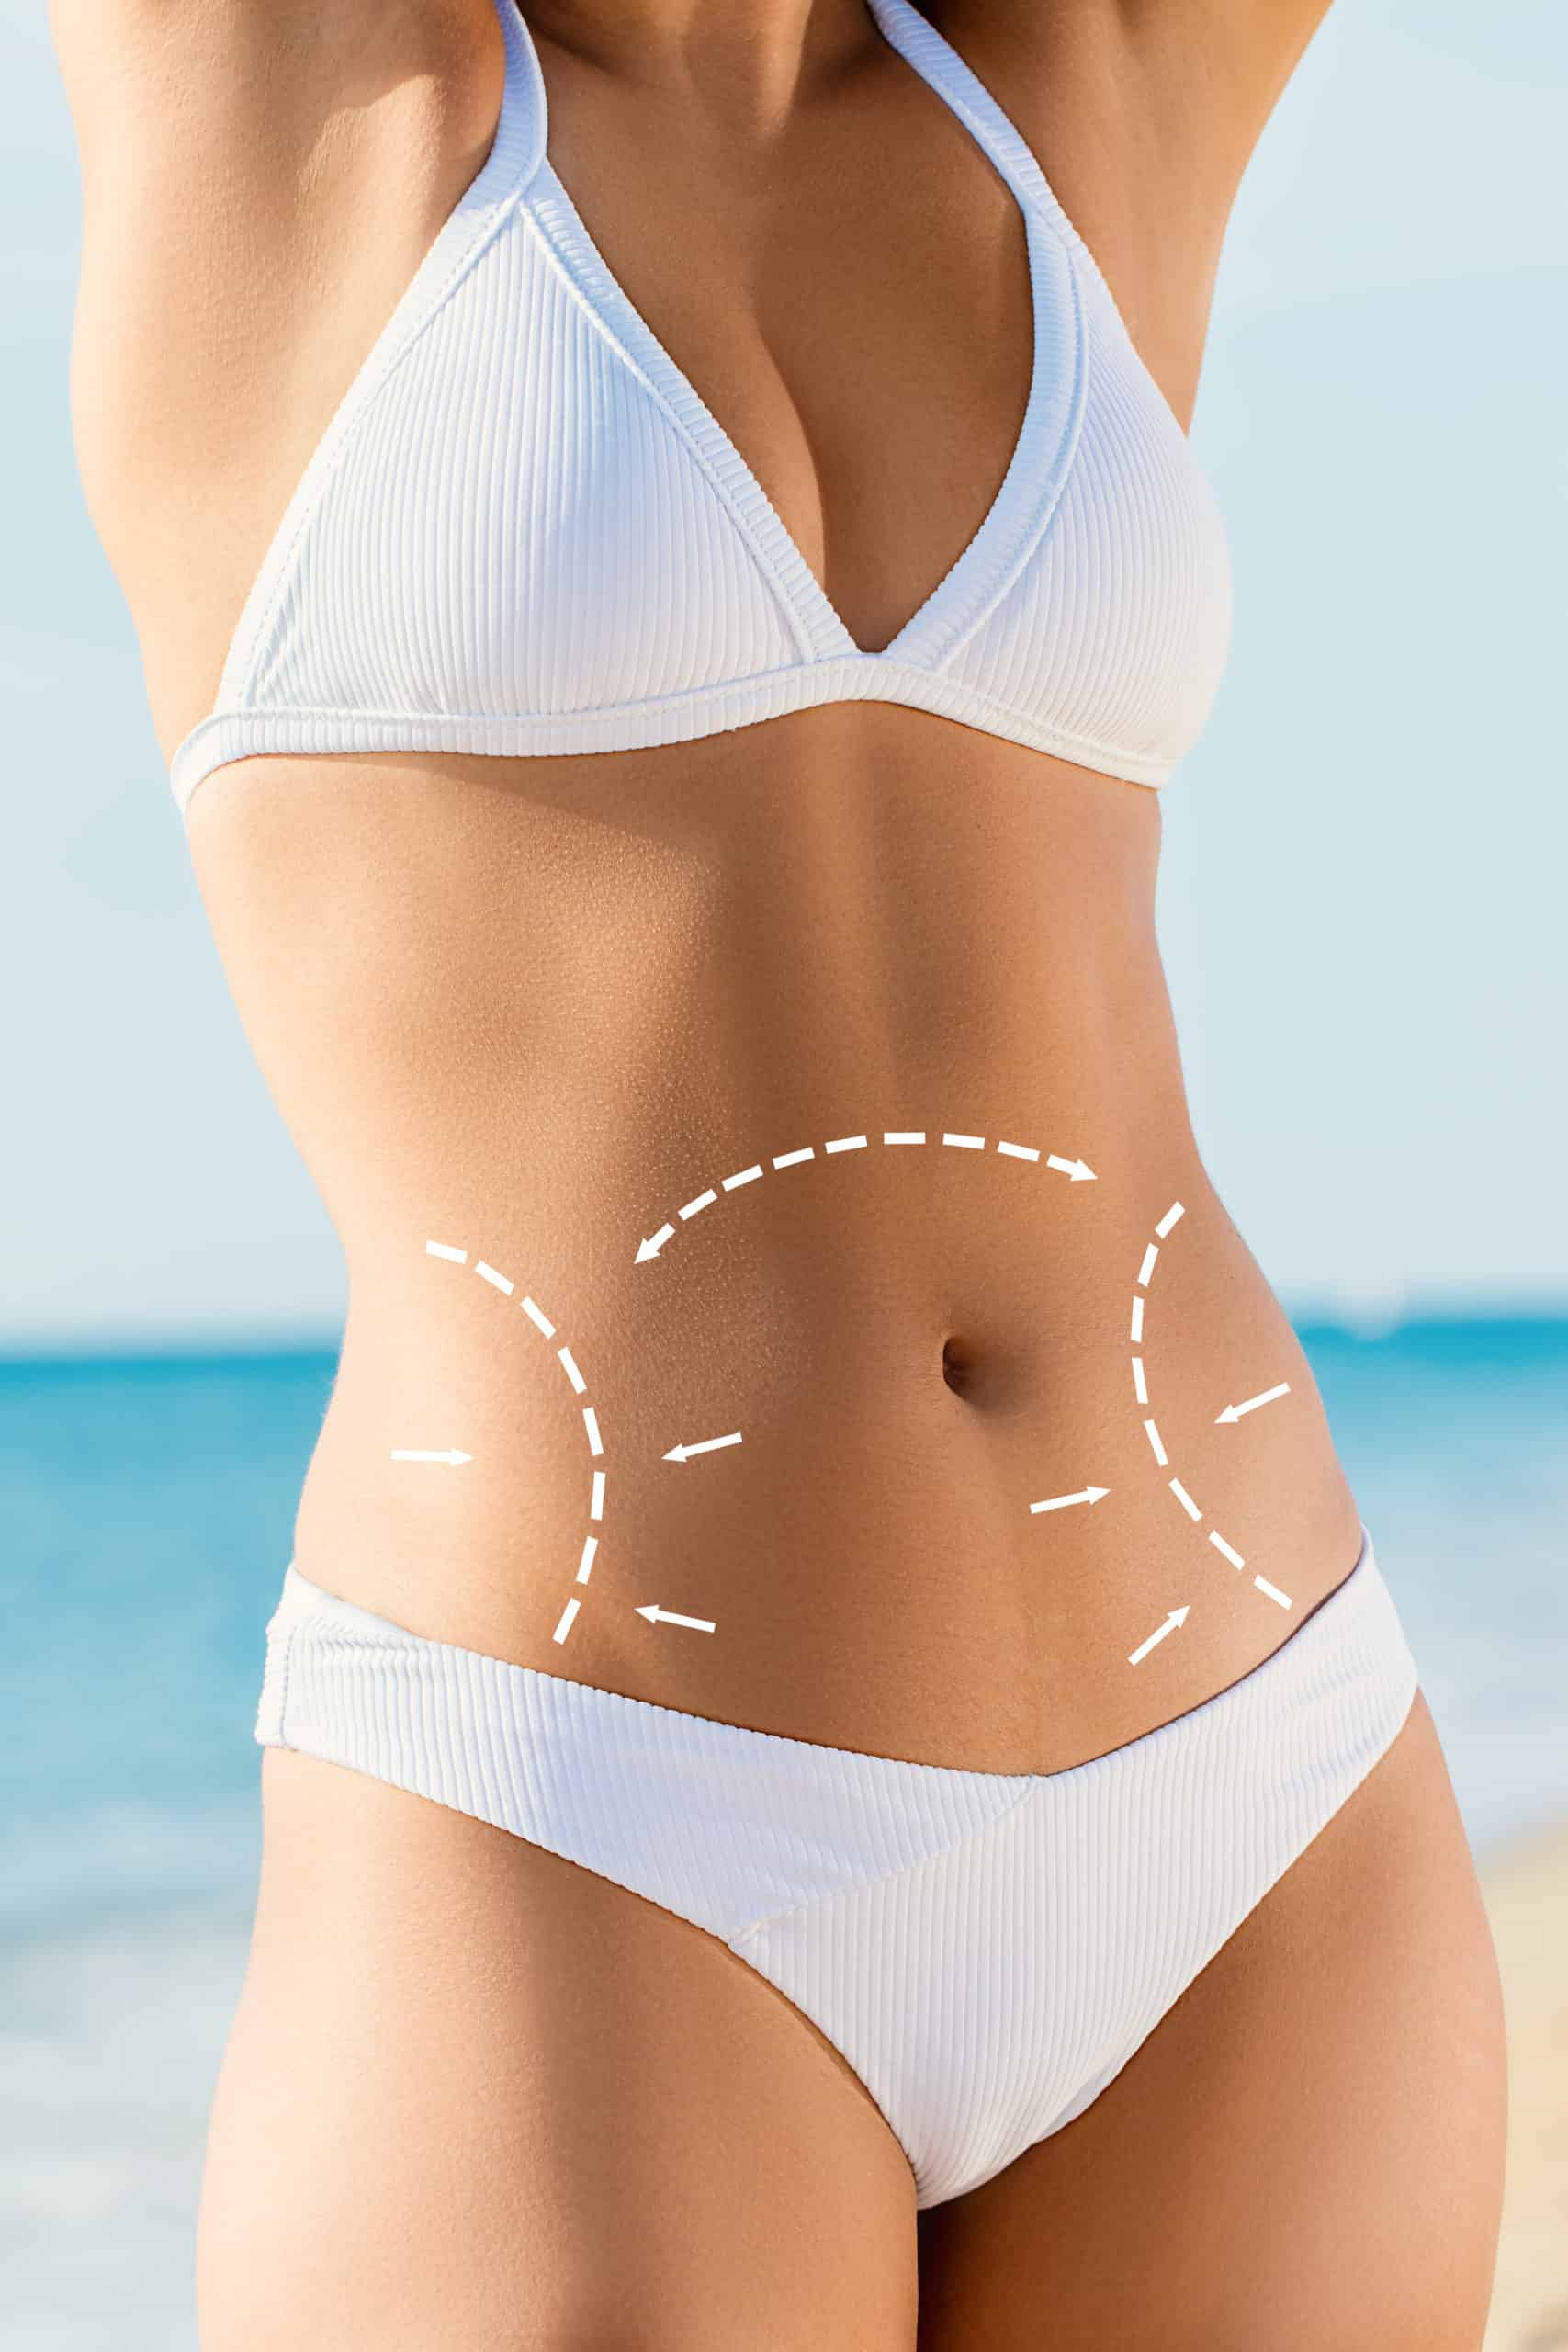 Liposuction weight loss surgery Montreal